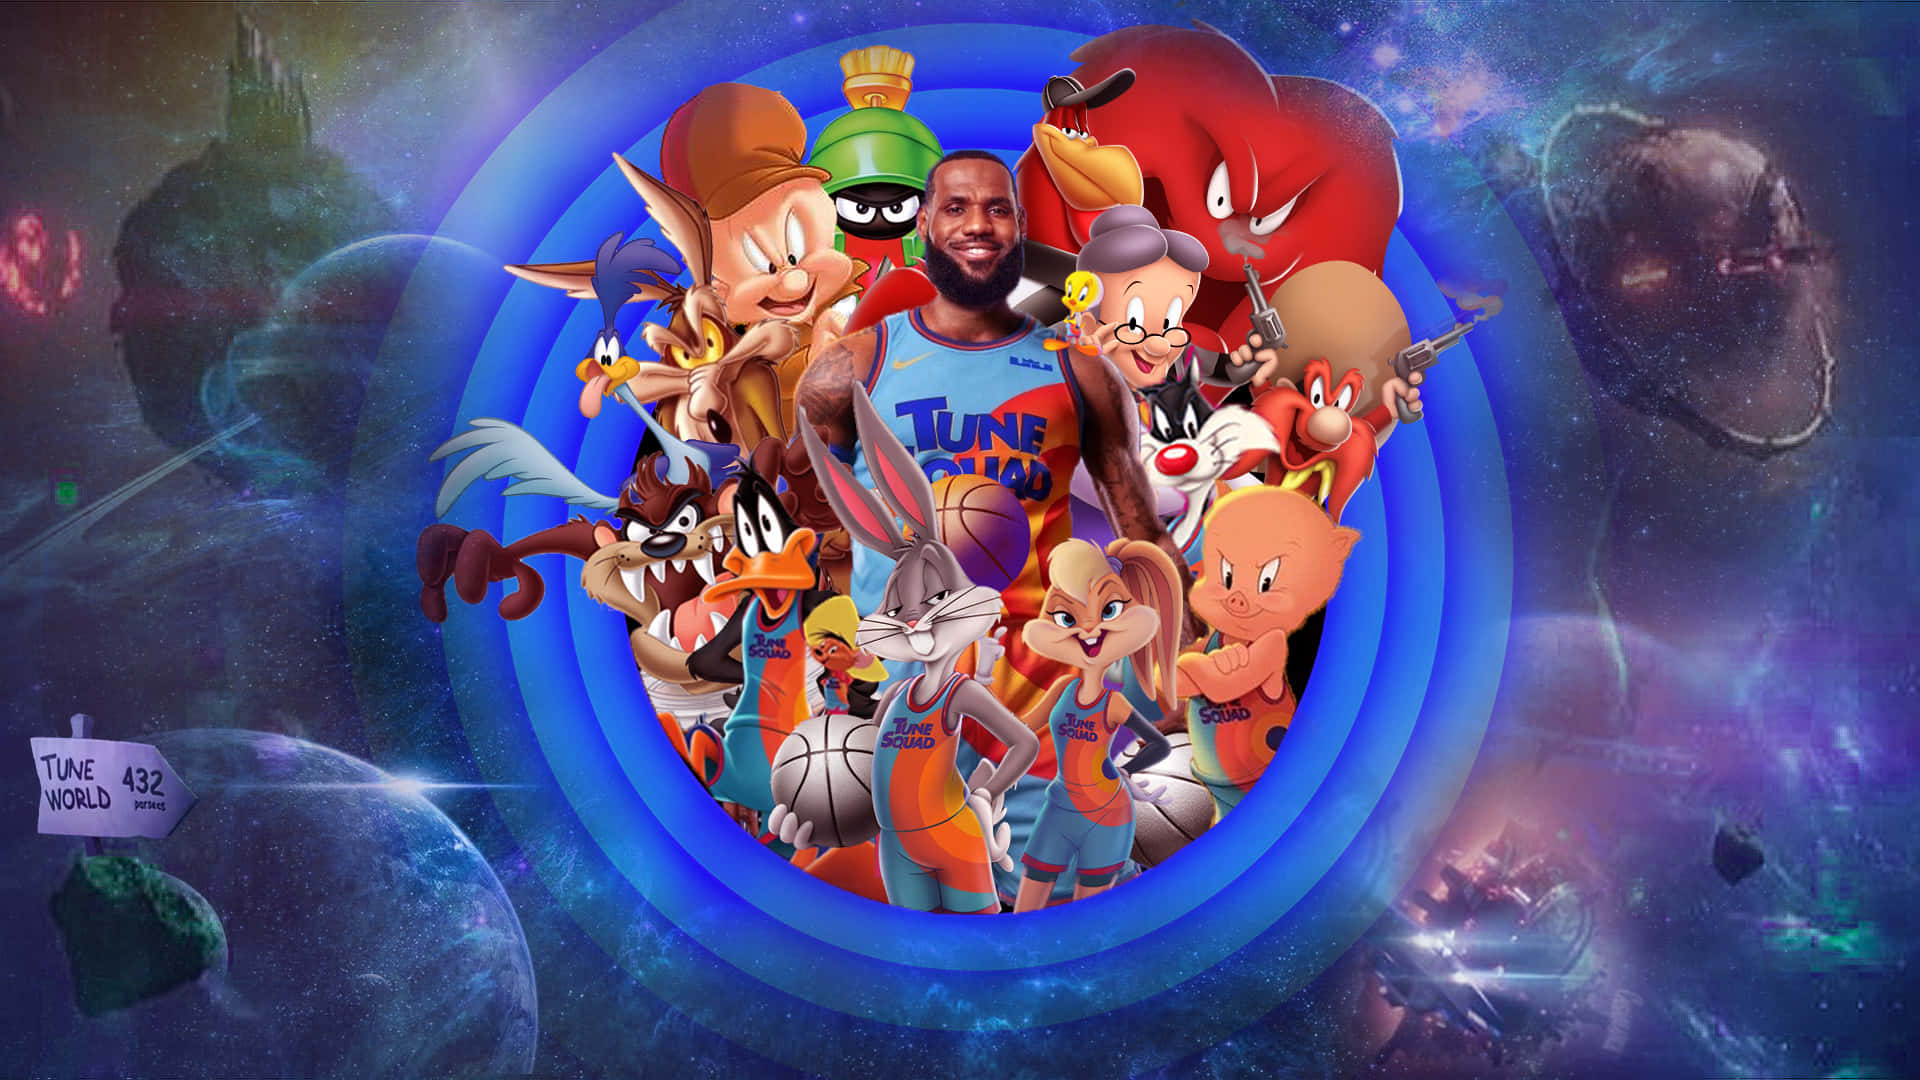 Shoot Hoops Above the Atmosphere with Cool Space Jam Wallpaper